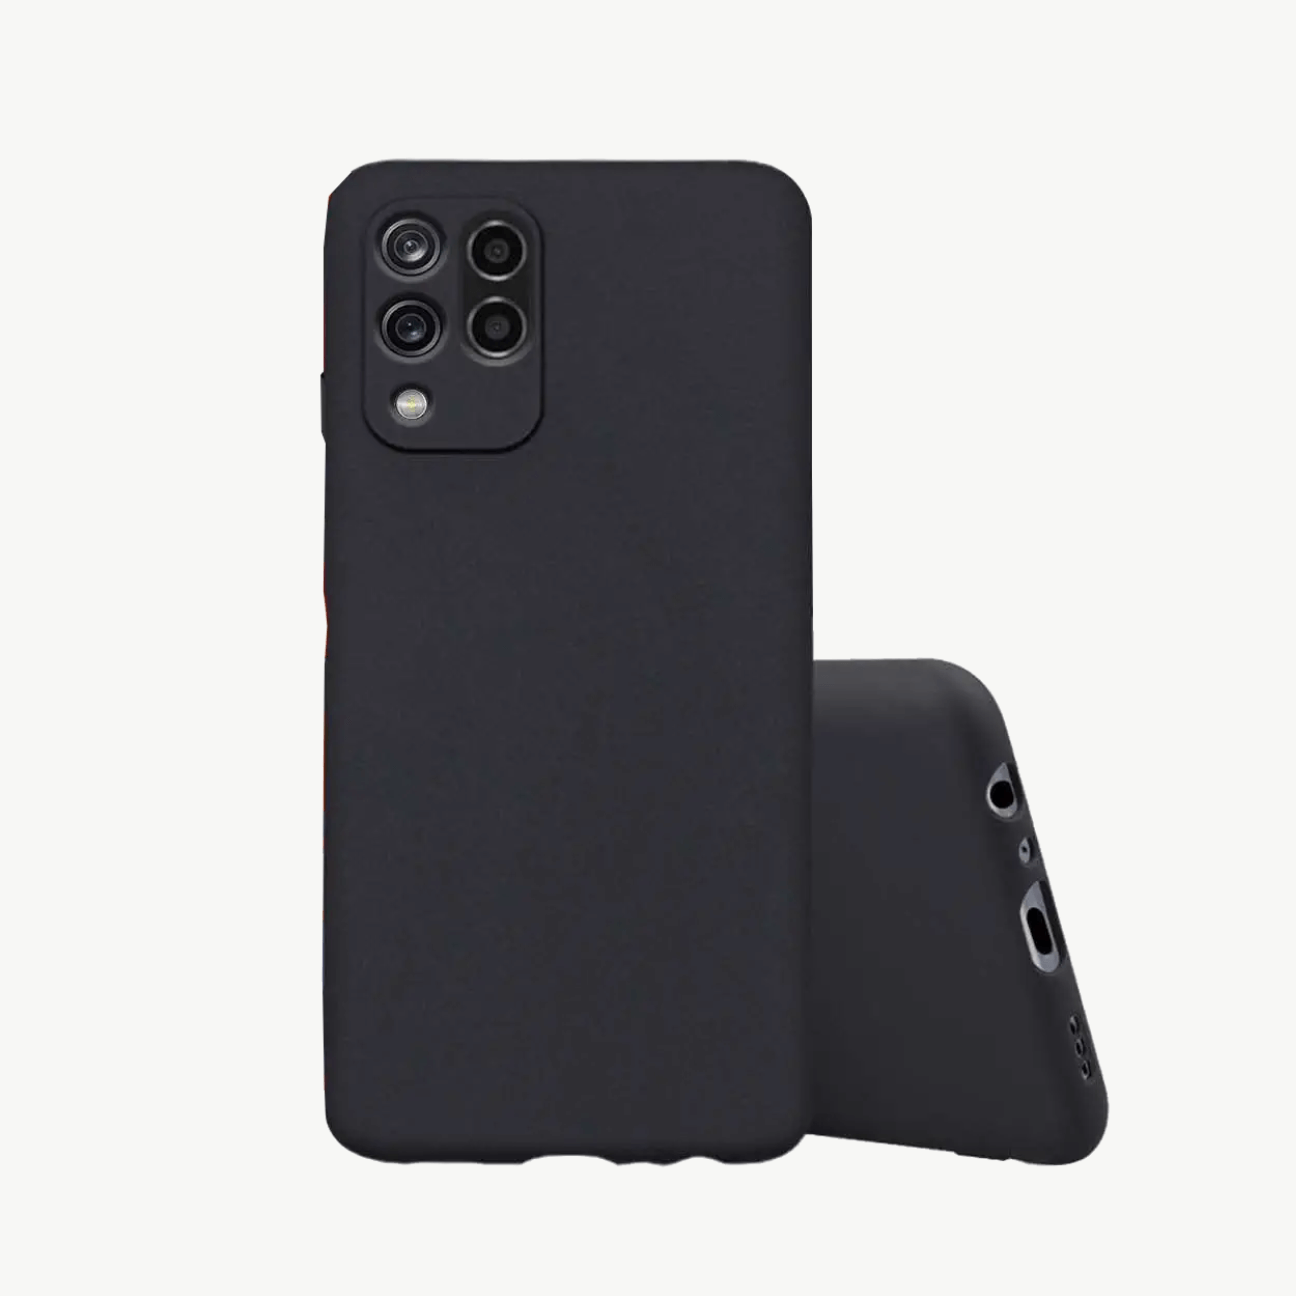 iPhone XR Black Soft Silicone Phone Case Image